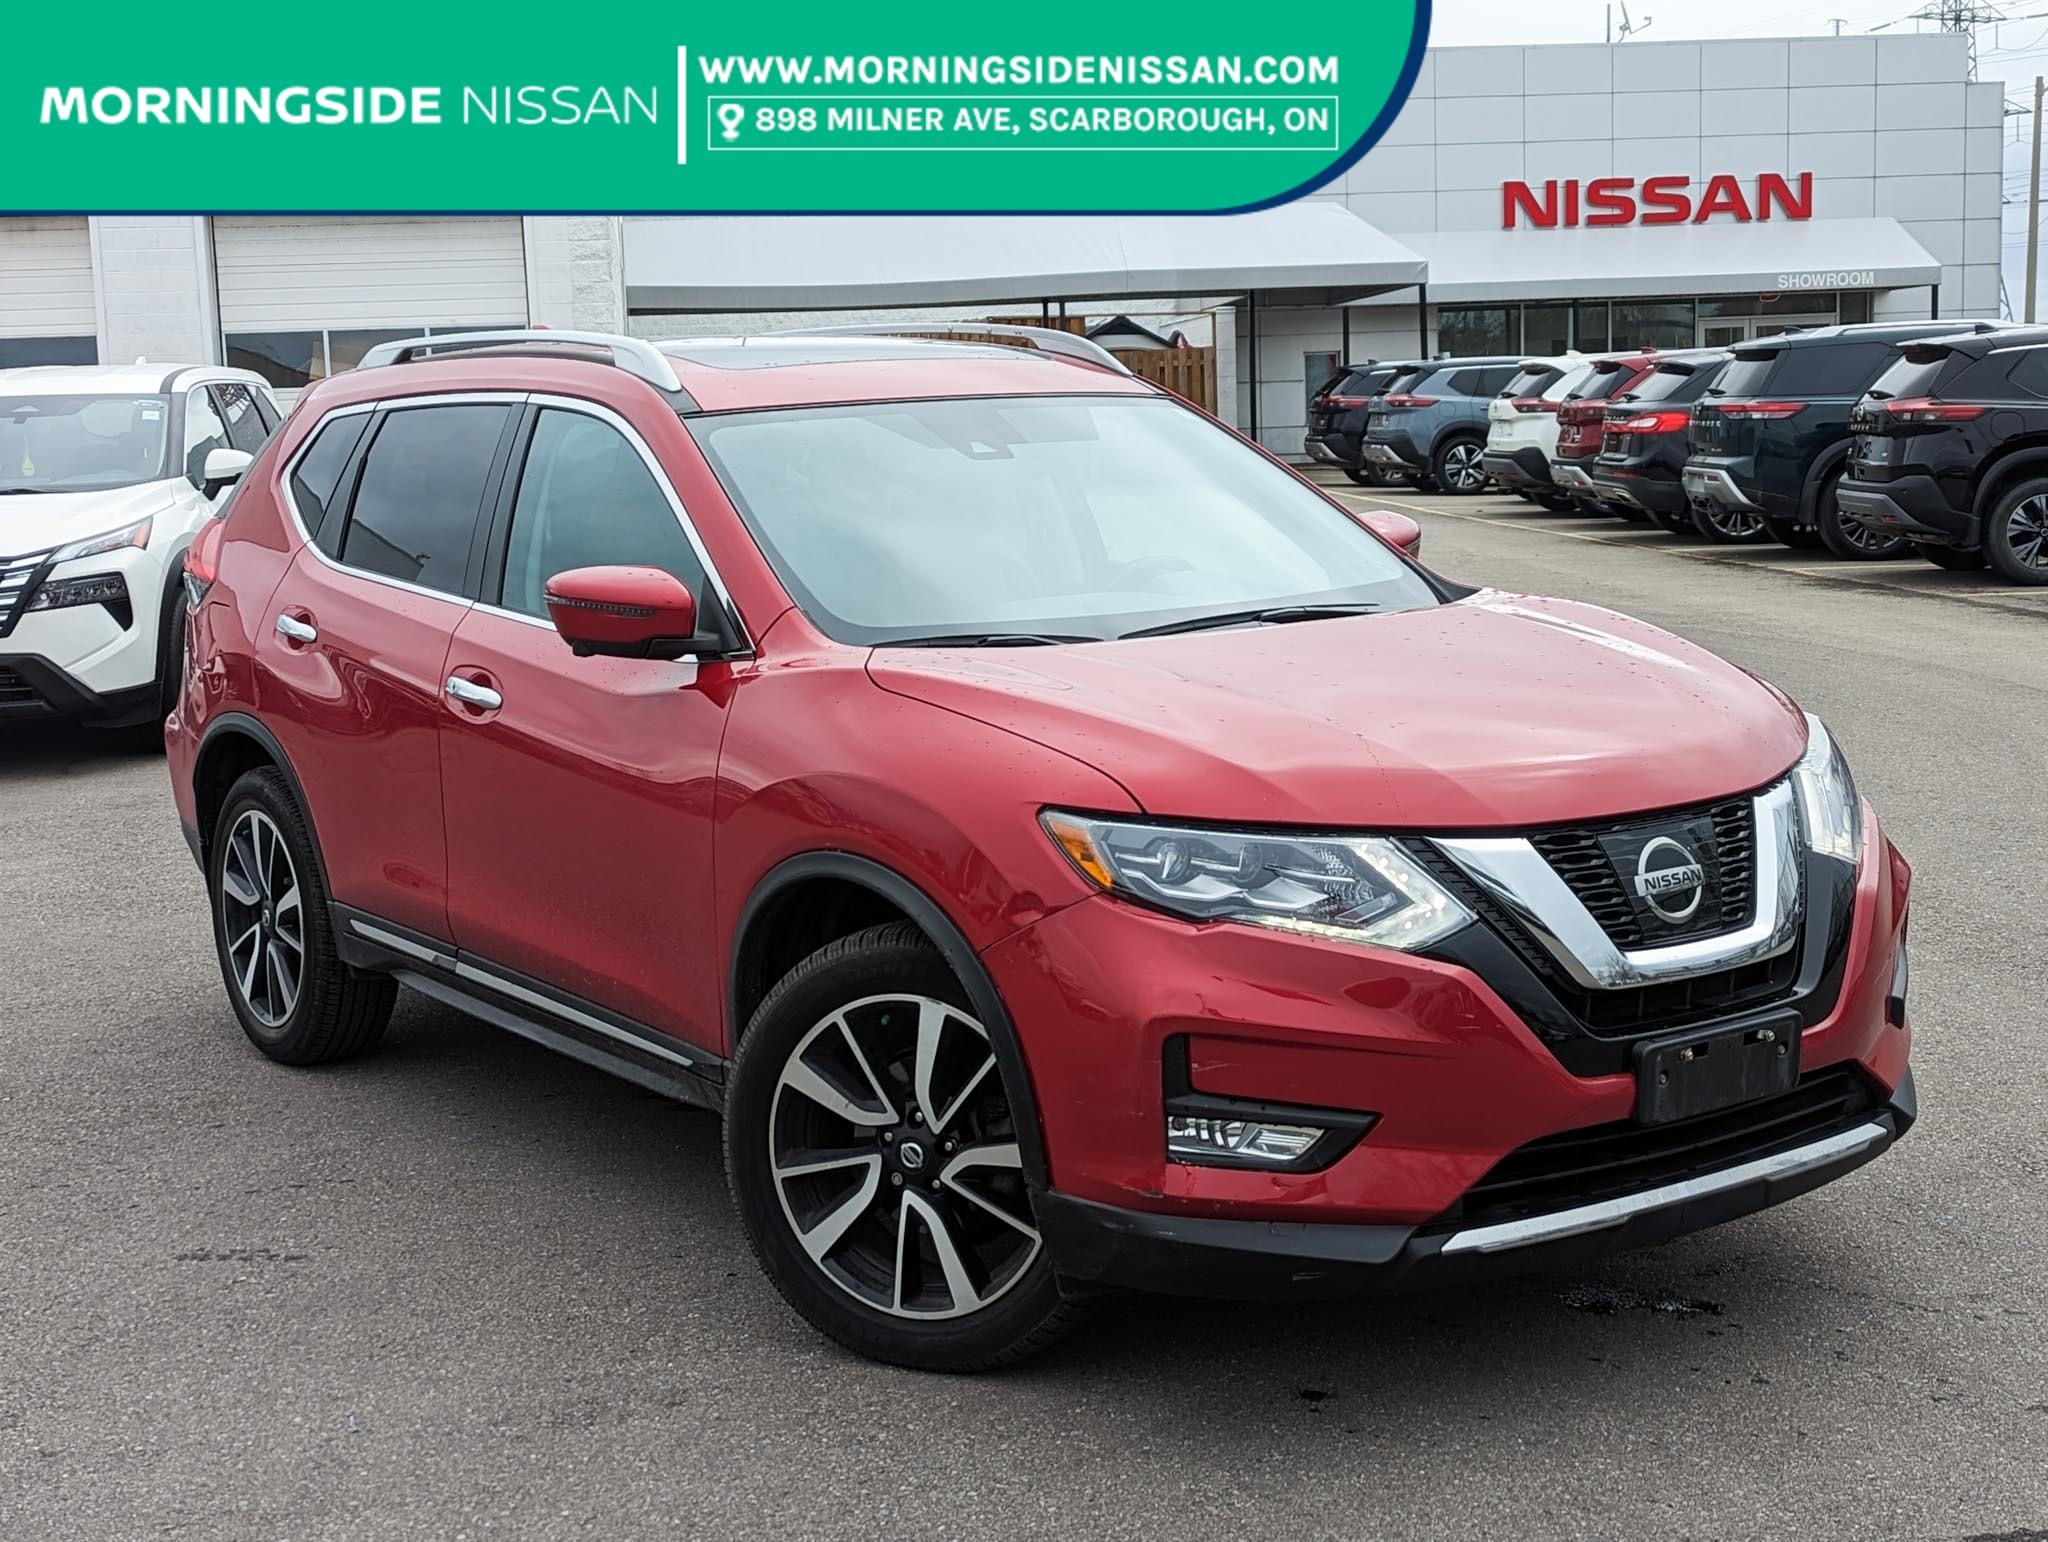 2017 Nissan Rogue SL|ONE OWNER|NO ACCIDENT|LEATHER|